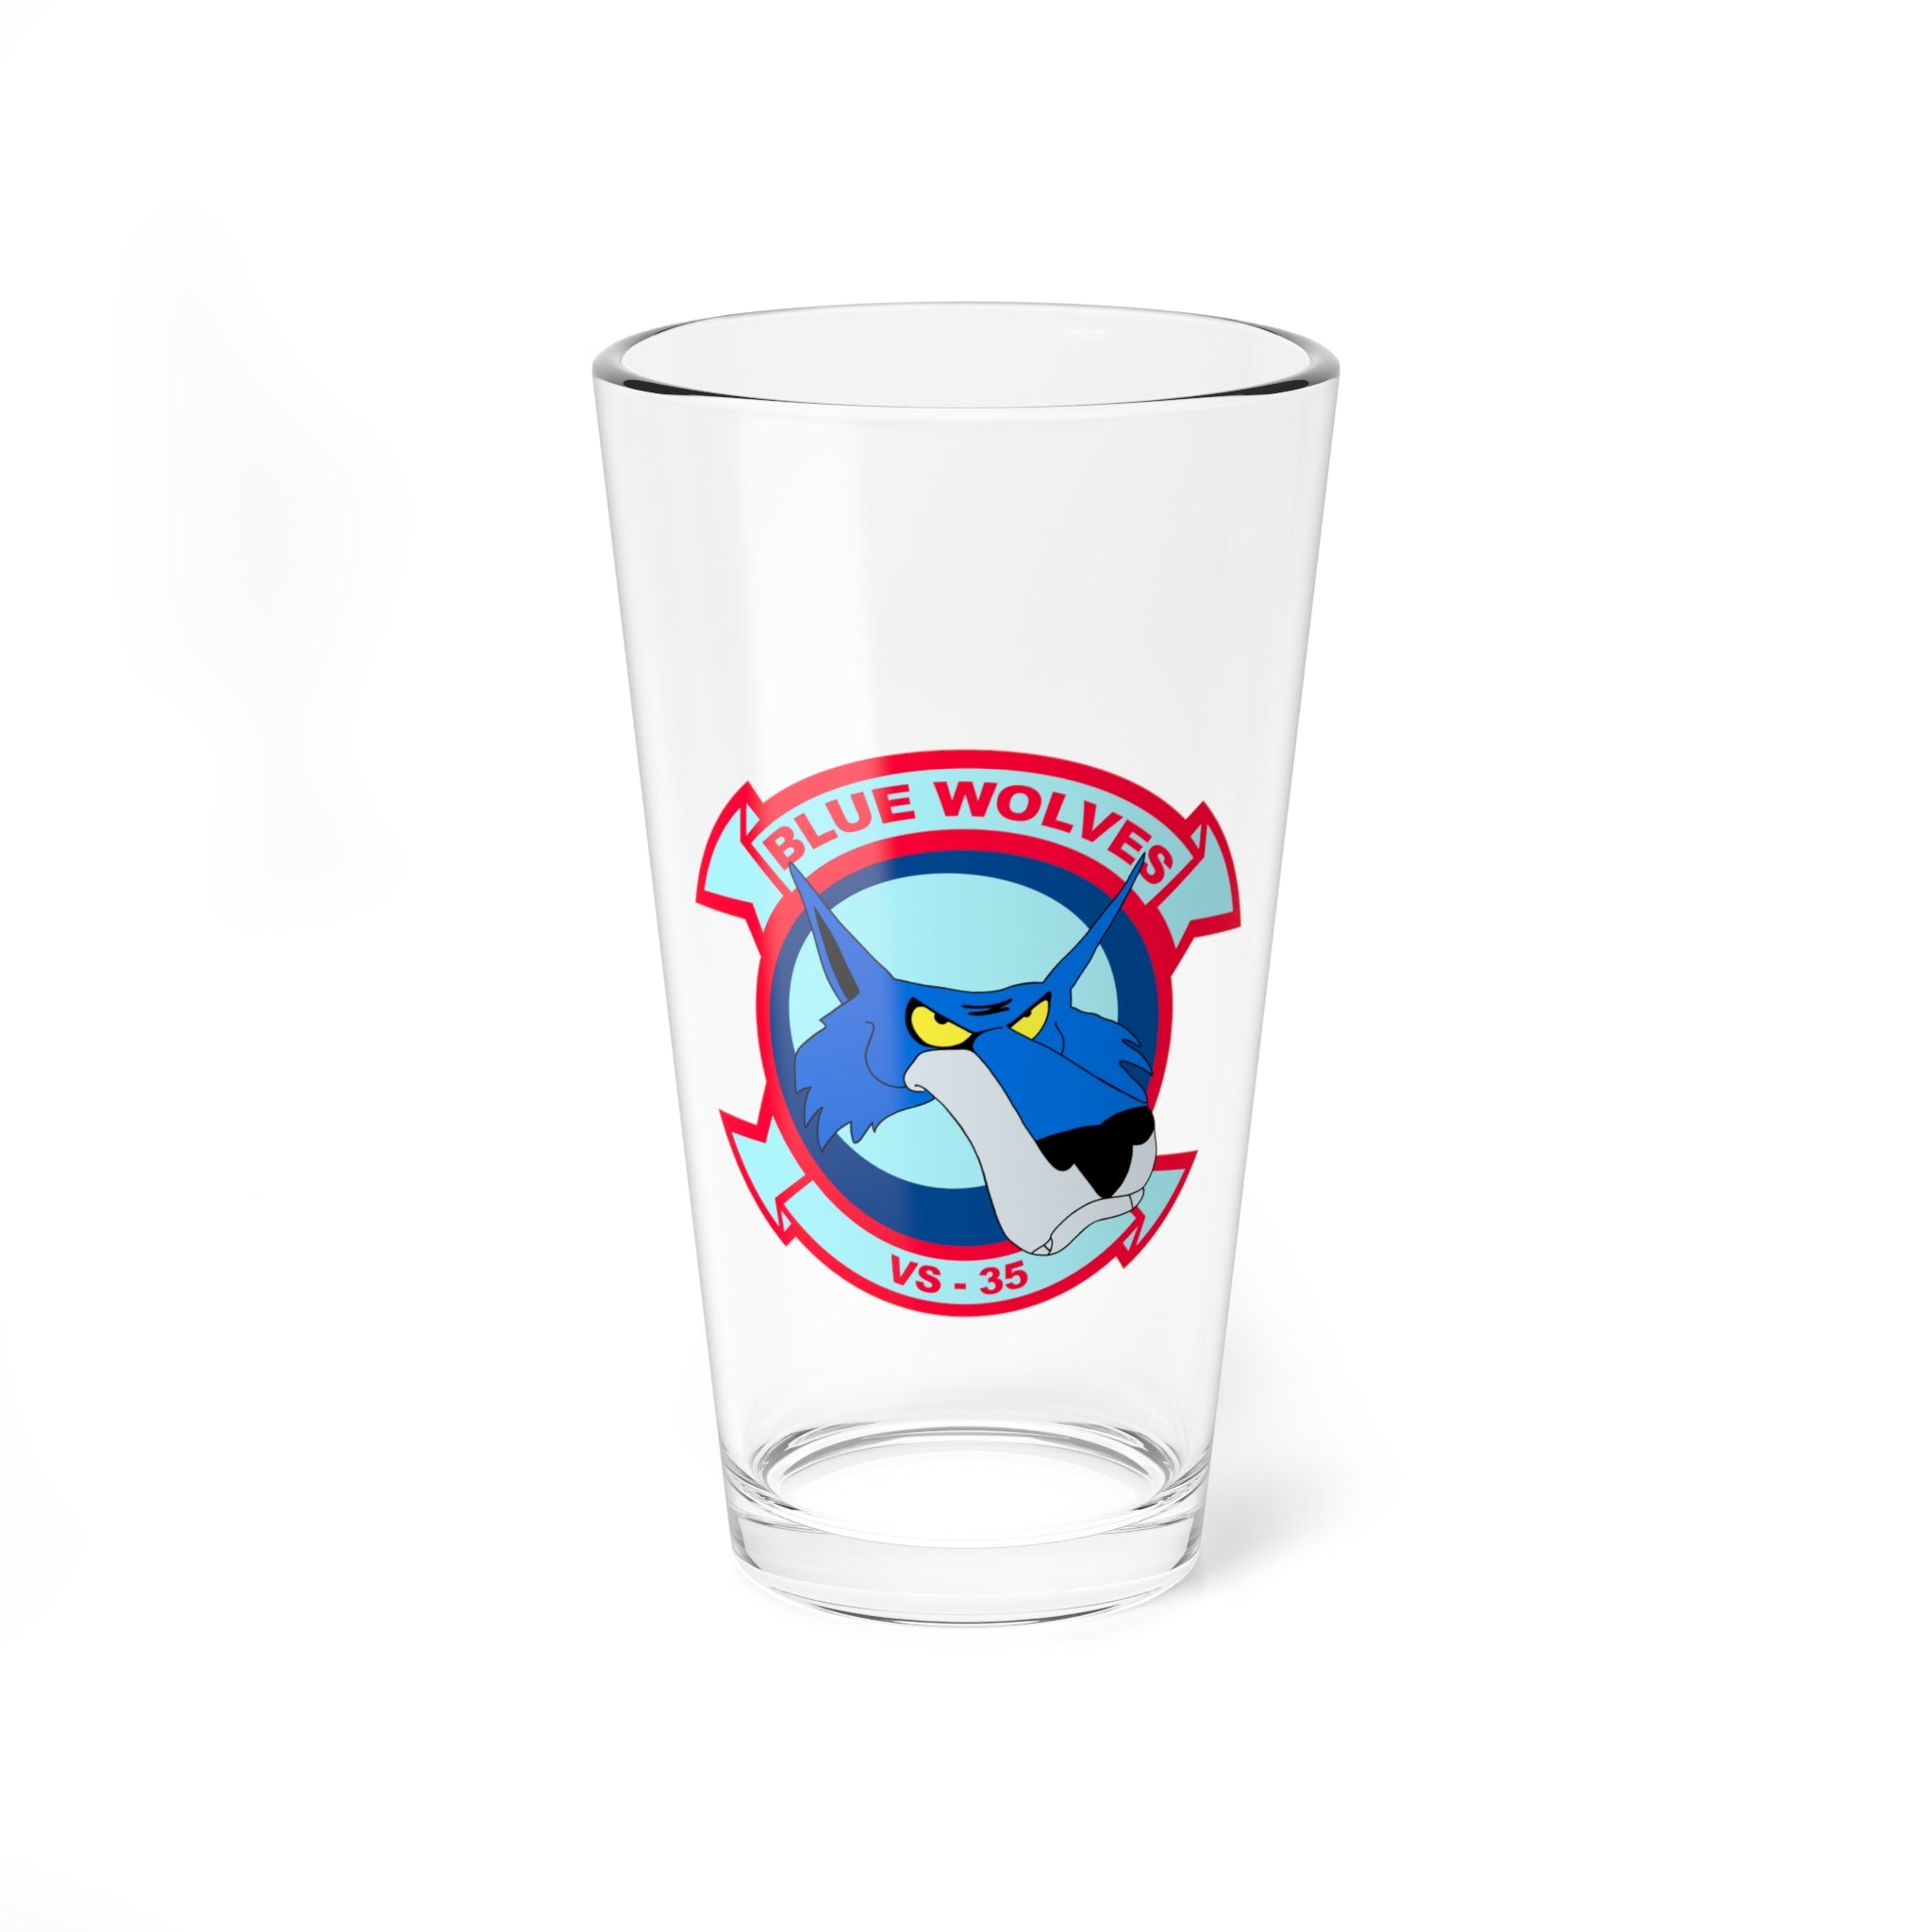 VS-35 "Blue Wolves" Aviator Pint Glass US Navy Sea Control Squadron flying the S-3 Viking for retired and veteran Sailors.